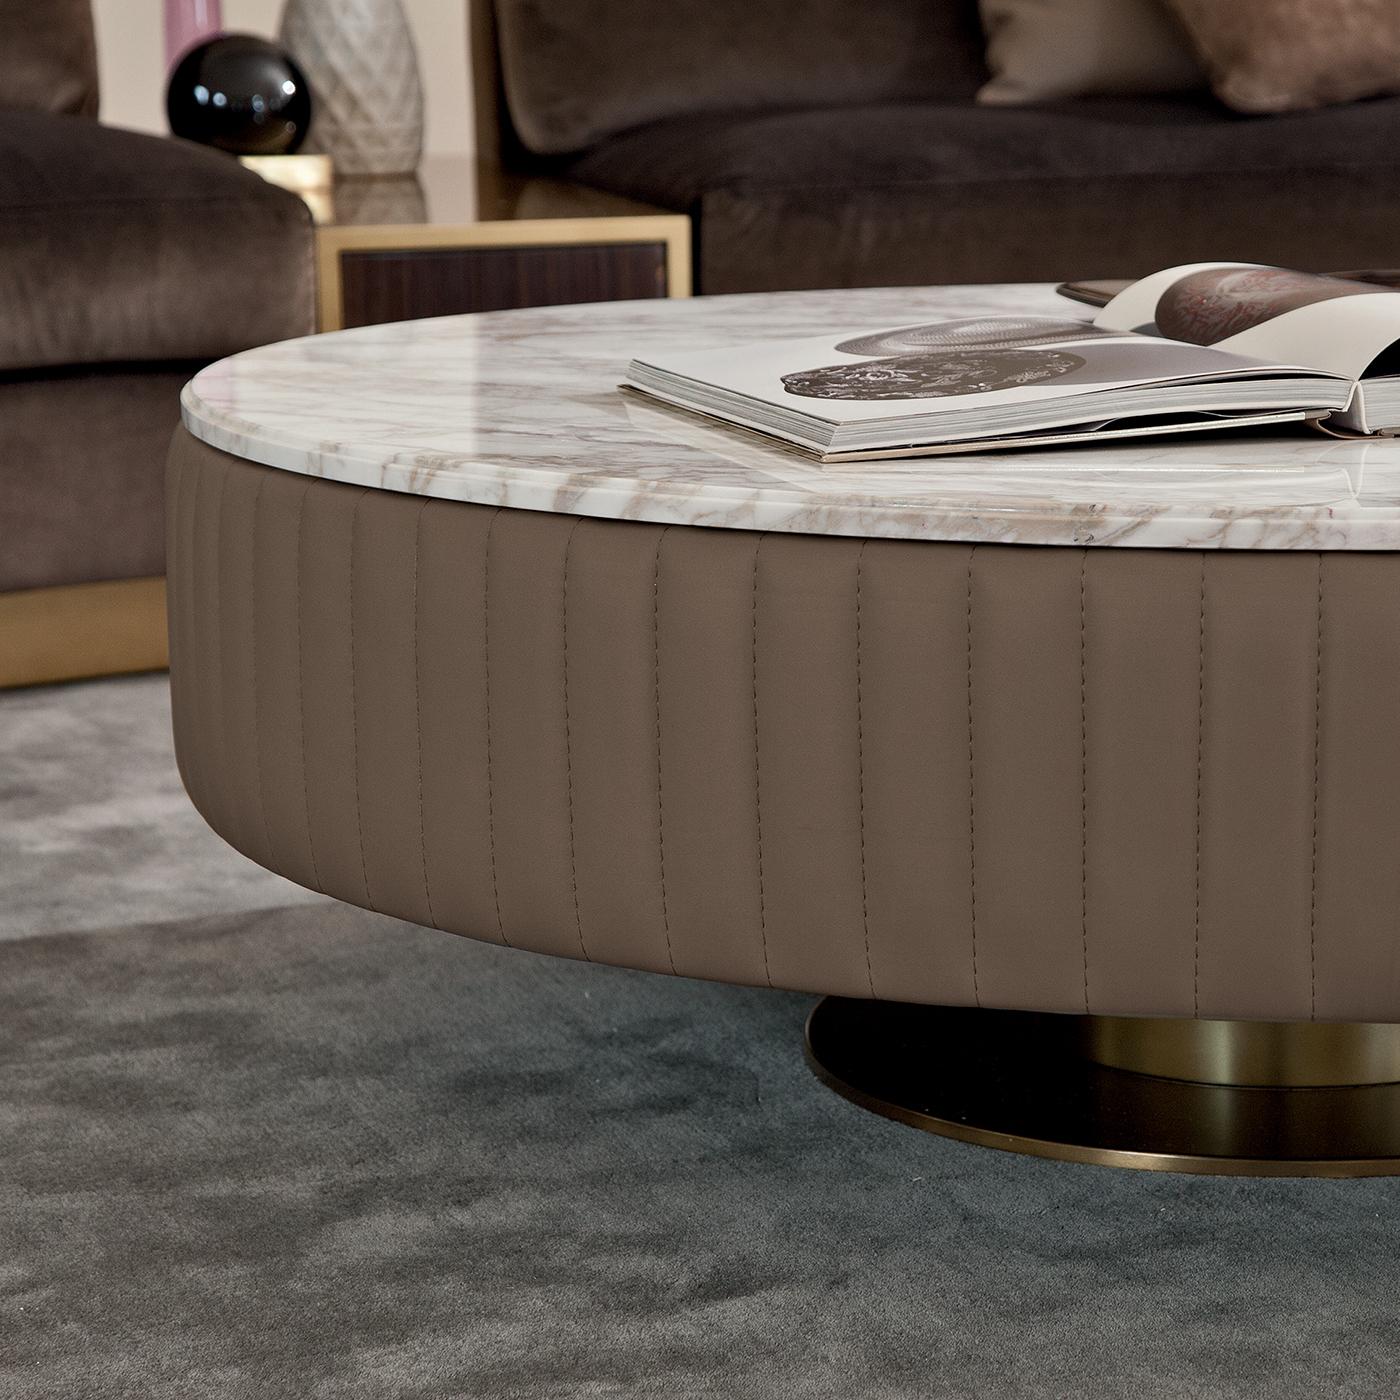 This majestic circular coffee table has a solid linden wood structure that takes center stage with its eye-catching details. Its large Calacatta gold marble top is framed with a large rim upholstered in grosgrain gray leather (in the picture: